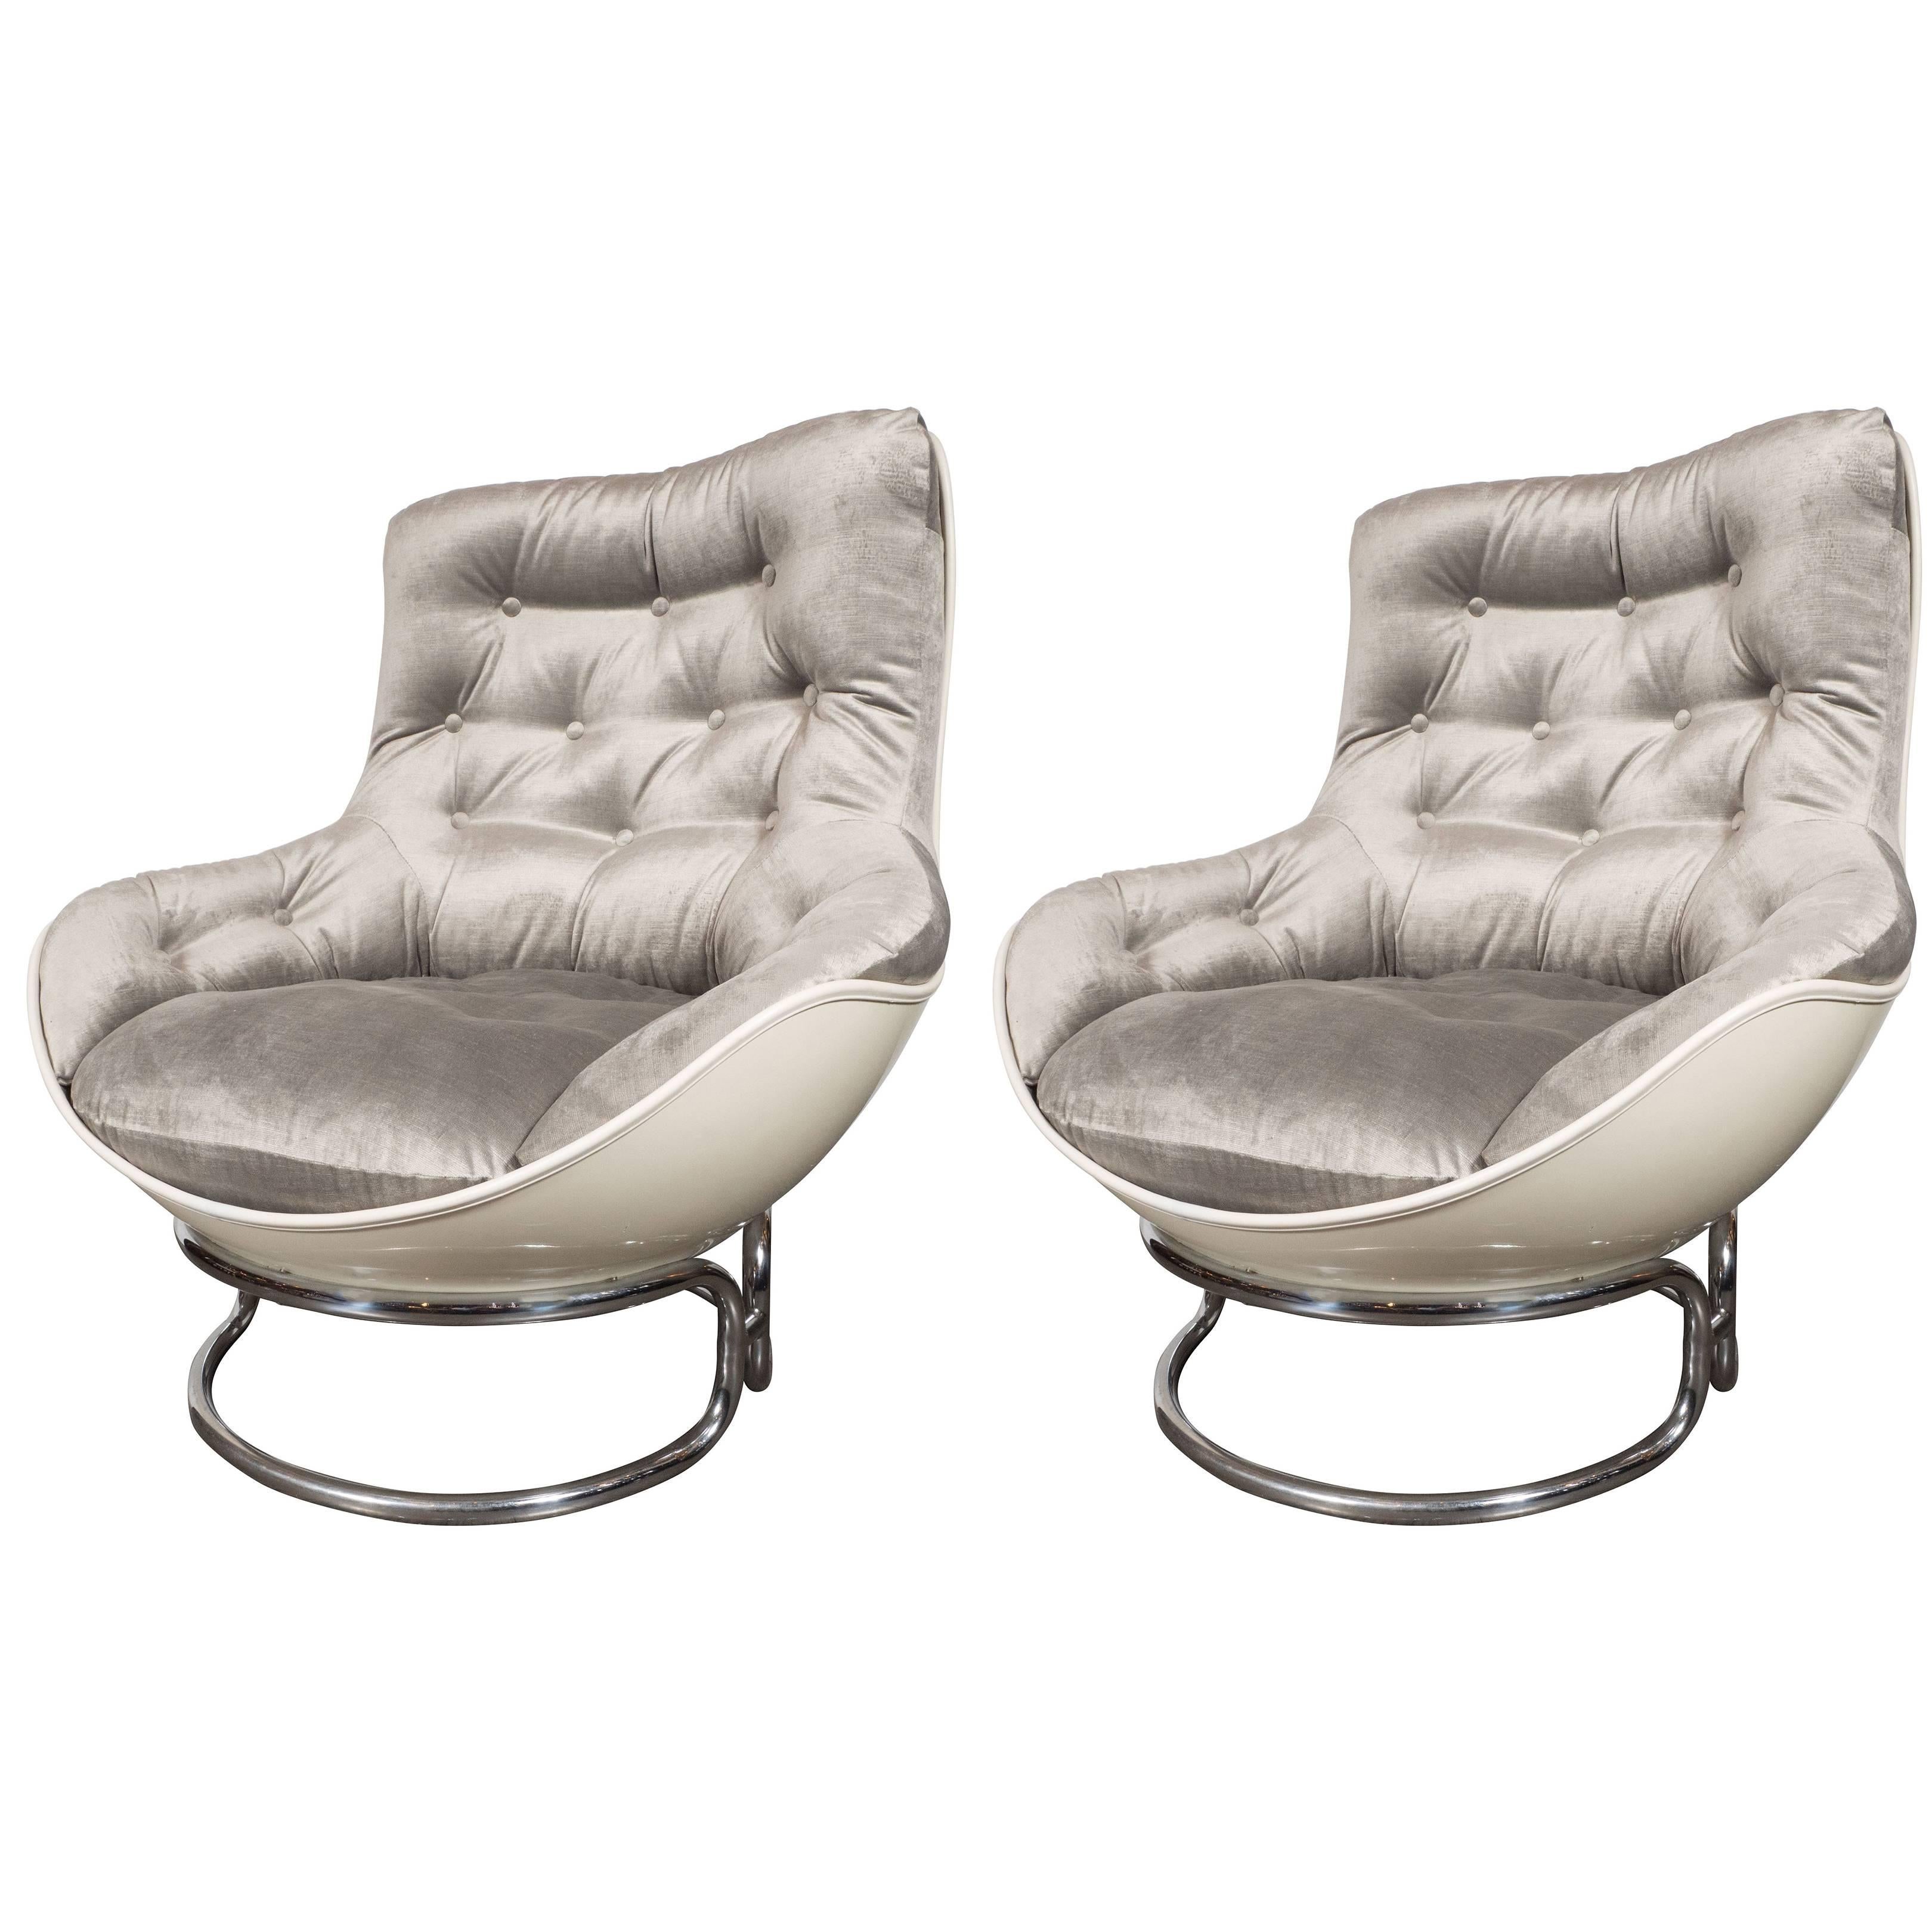 Pair of French Mid-Century Modern Chrome and Fiberglass Lounge Chairs, Airborne